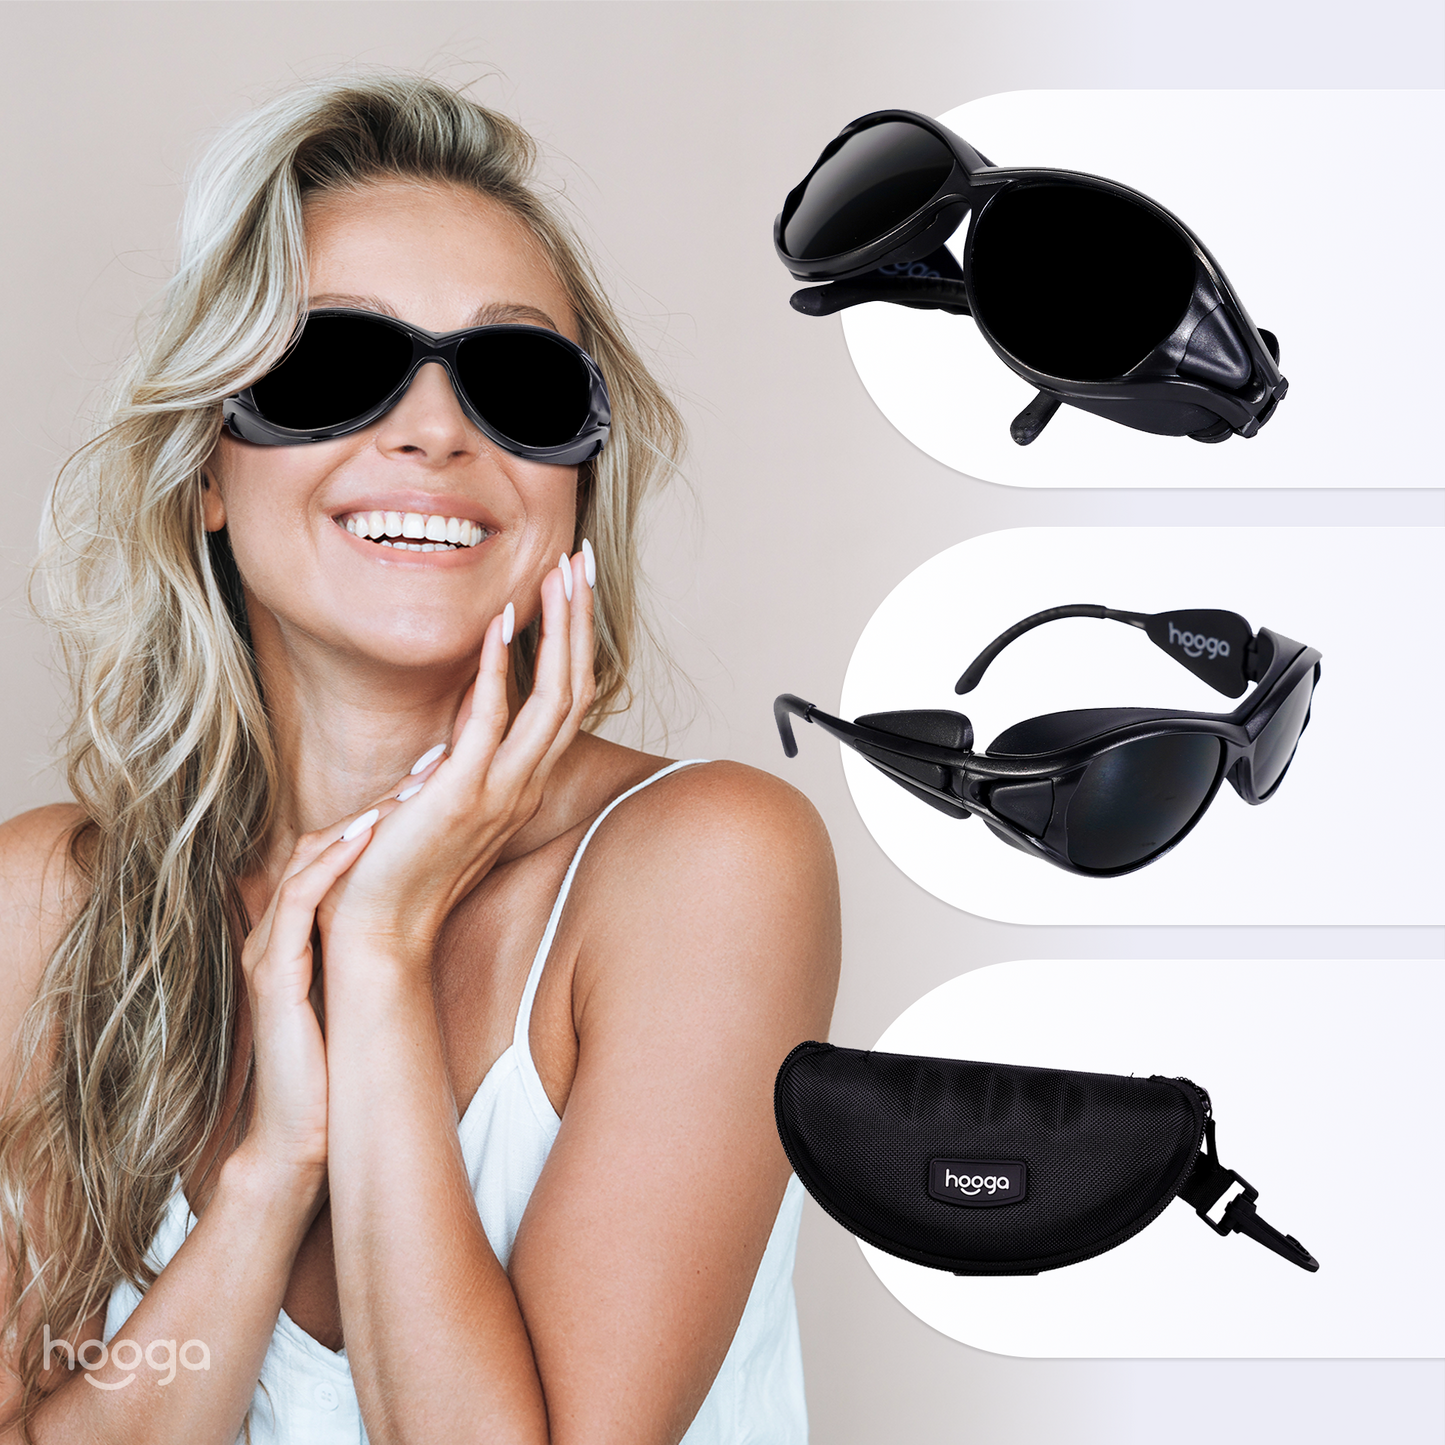 Red Light Therapy Protective Glasses